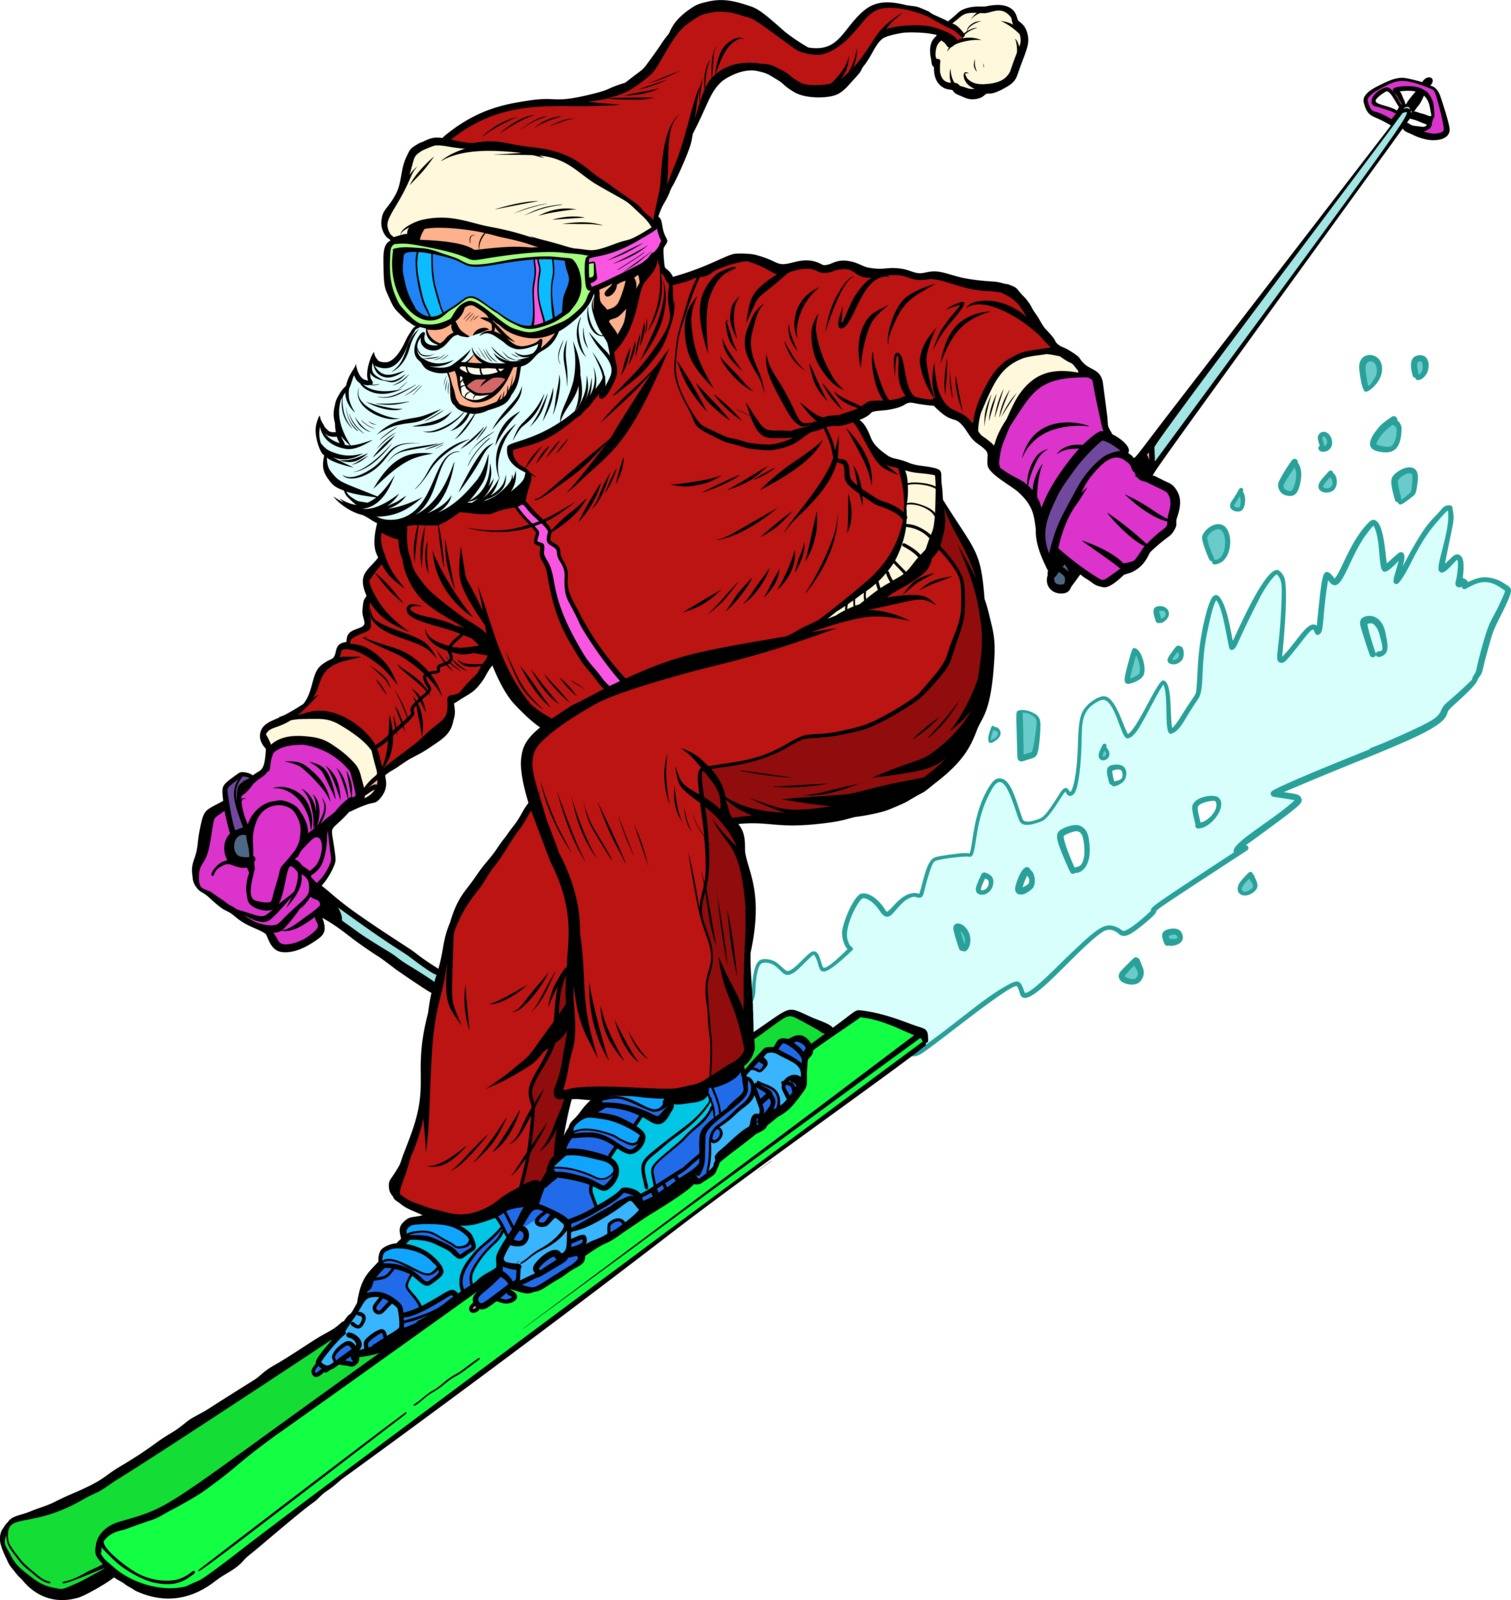 Santa Claus character goes skiing merry Christmas and happy new year. Pop art retro vector illustration vintage kitsch drawing 50s 60s